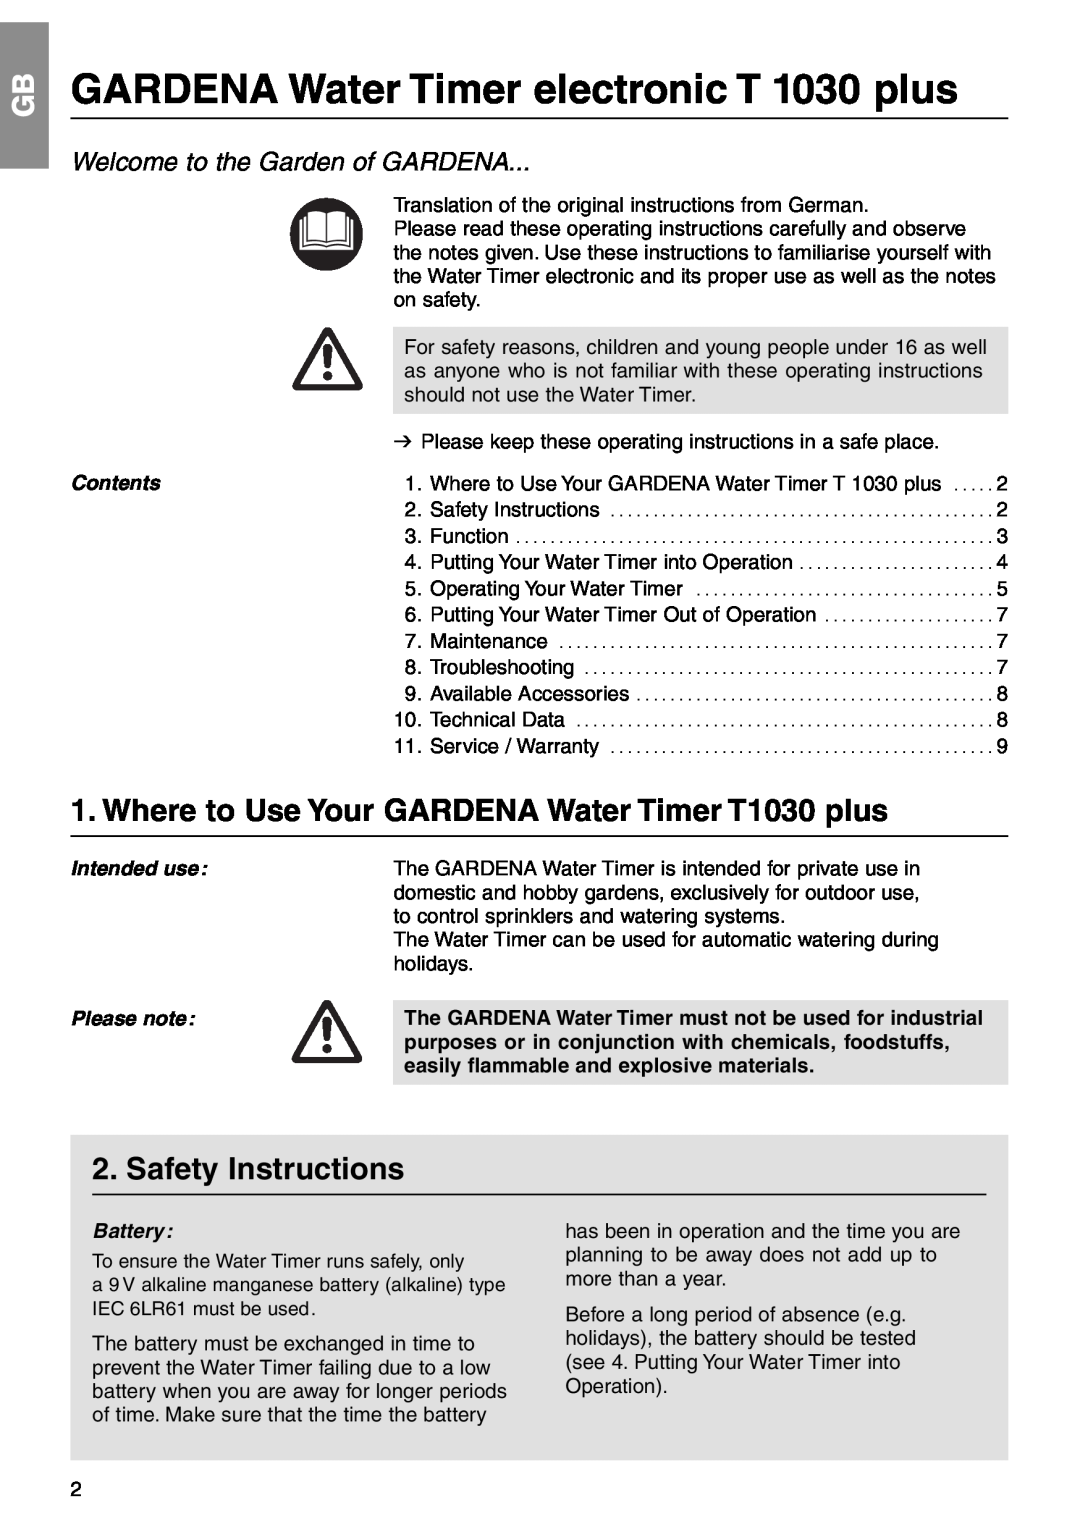 Gardena T 1030 Plus Safety Instructions, Contents, Intended use, Please note, Battery, Welcome to the Garden of GARDENA 